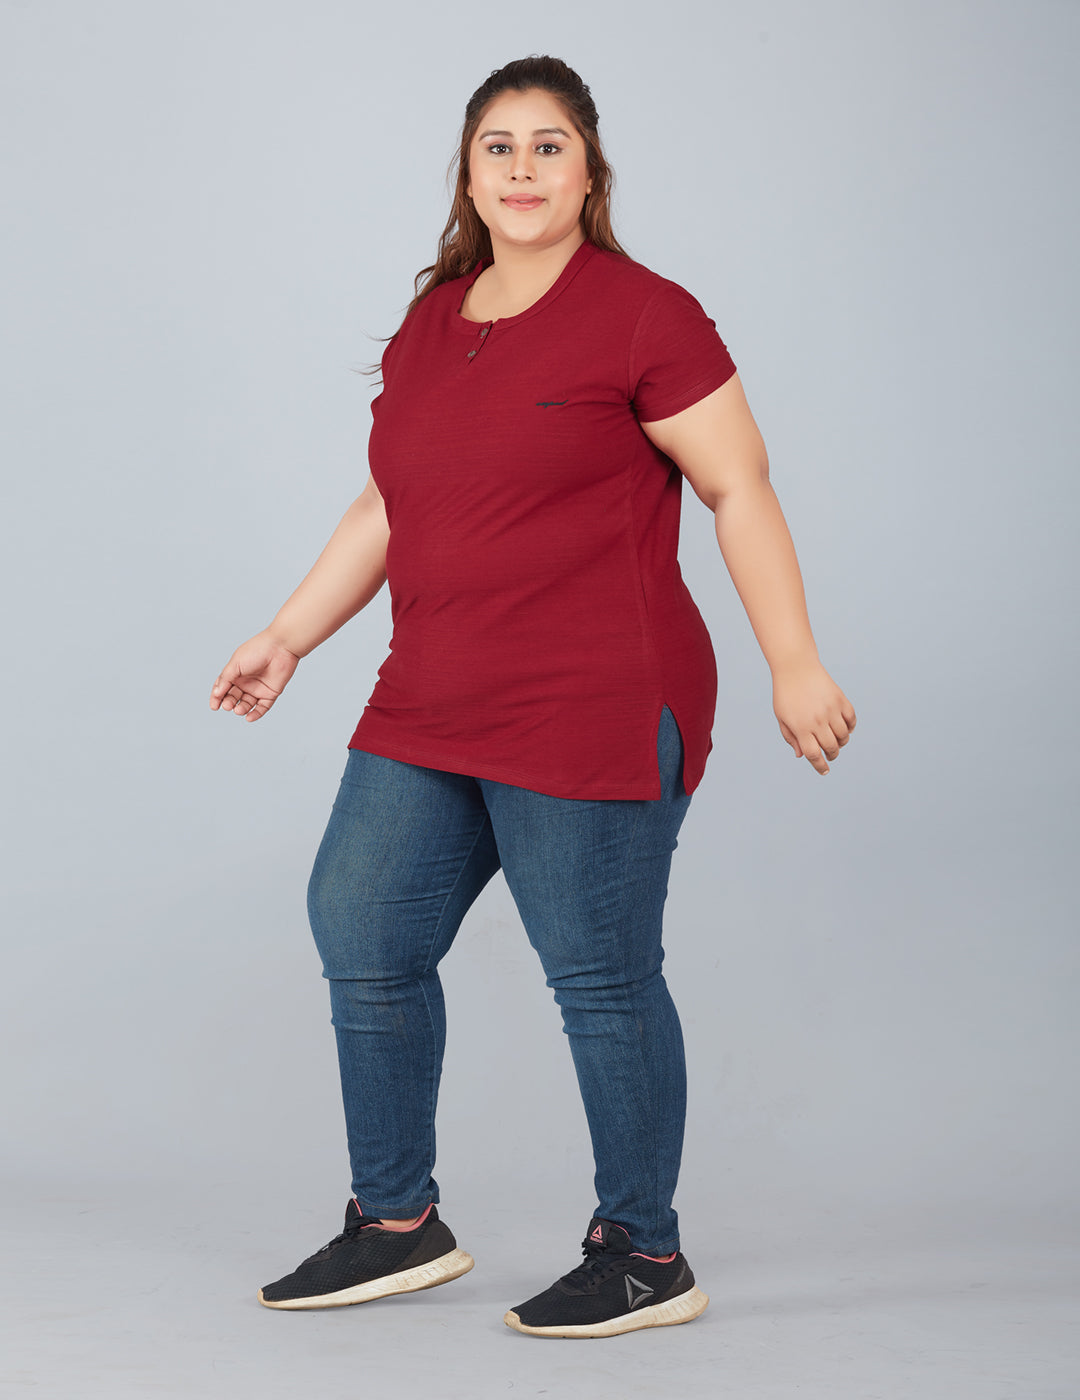 Plus Size Cotton T-shirts For Summer - Maroon